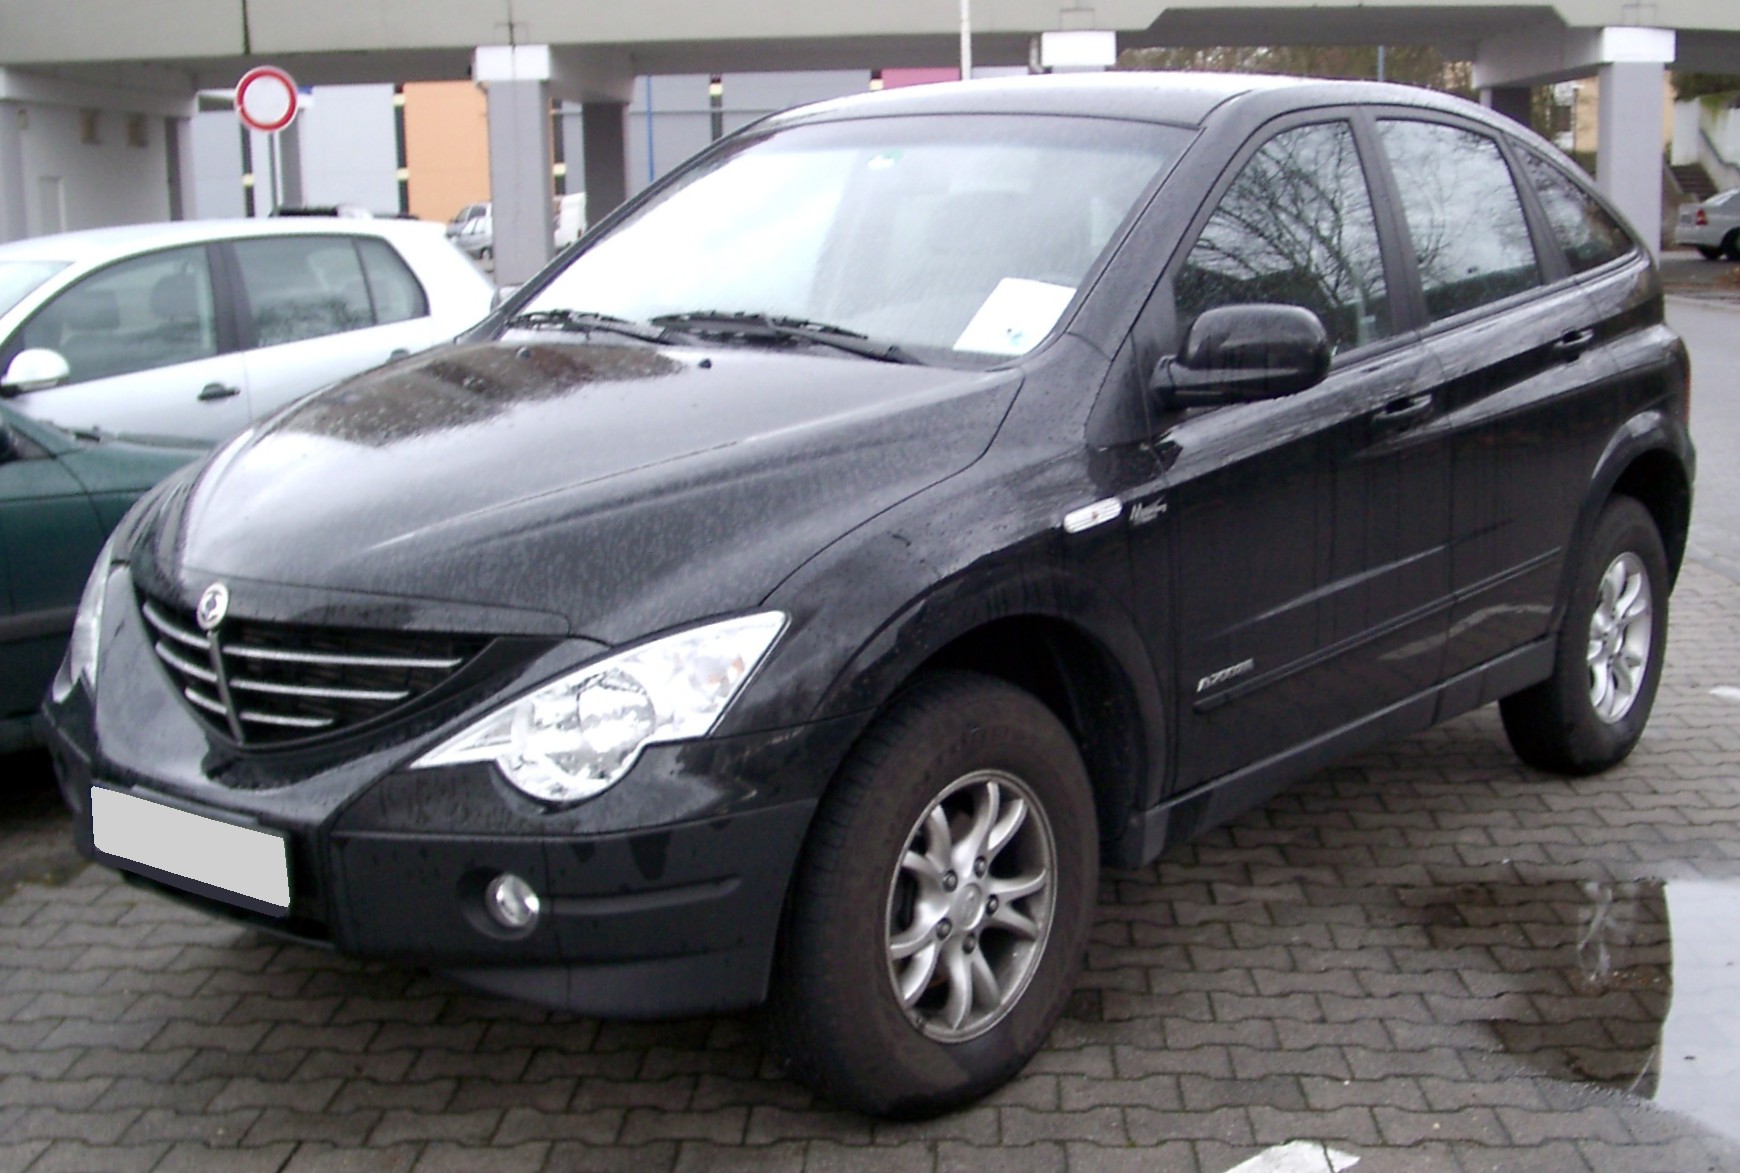 Fichier: Ssangyong Actyon avant 20080303.jpg - Wikimedia Commons